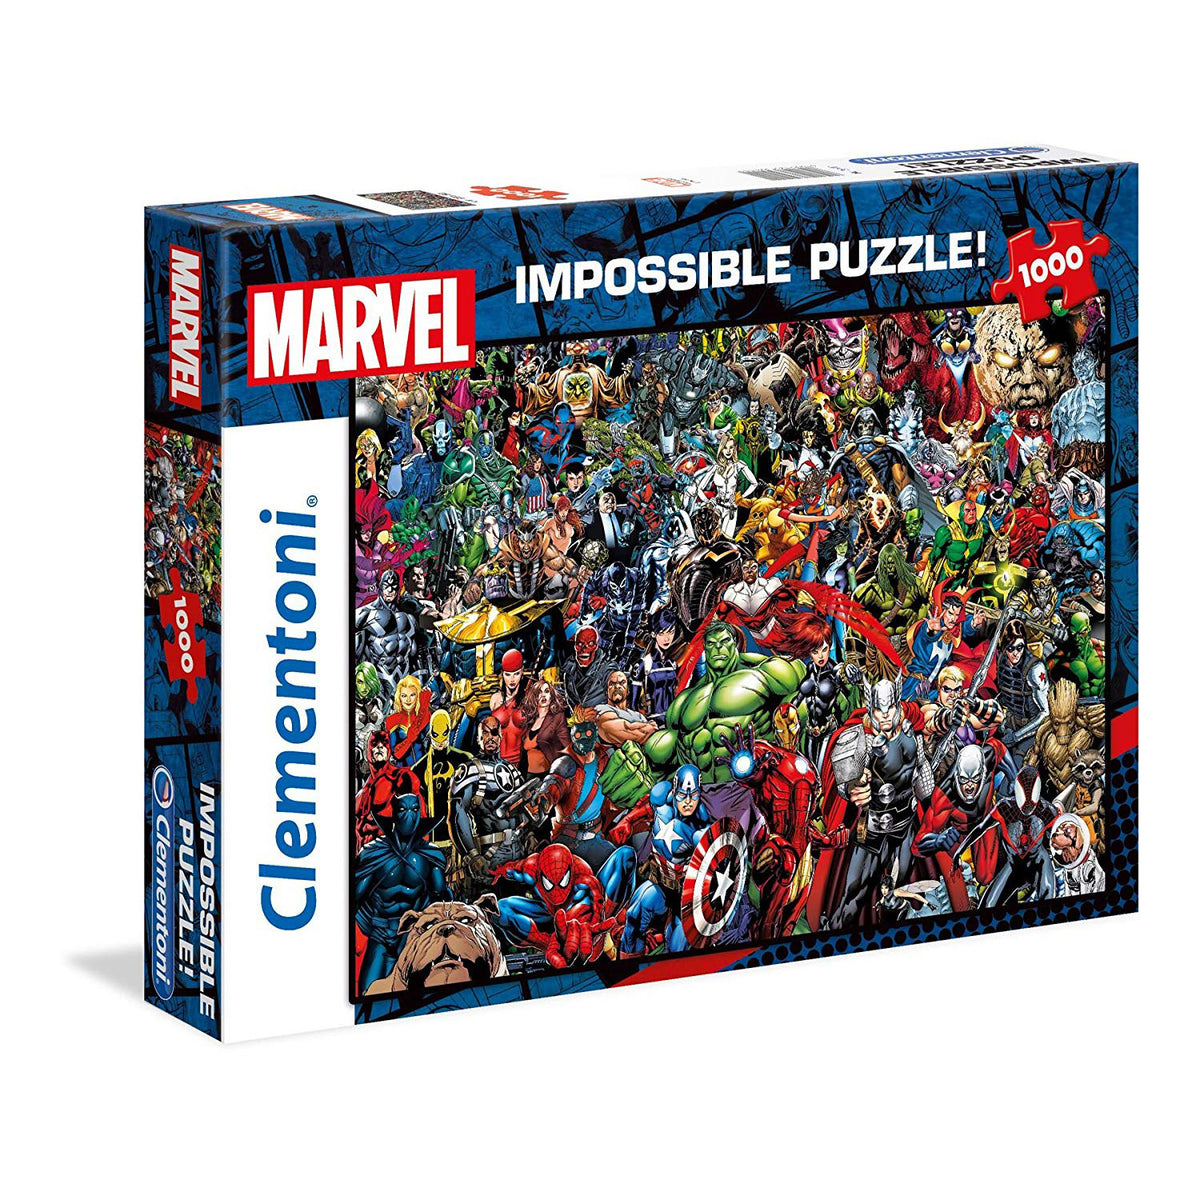 Clementoni Impossible - Marvel 80 Years 1000 Piece Jigsaw